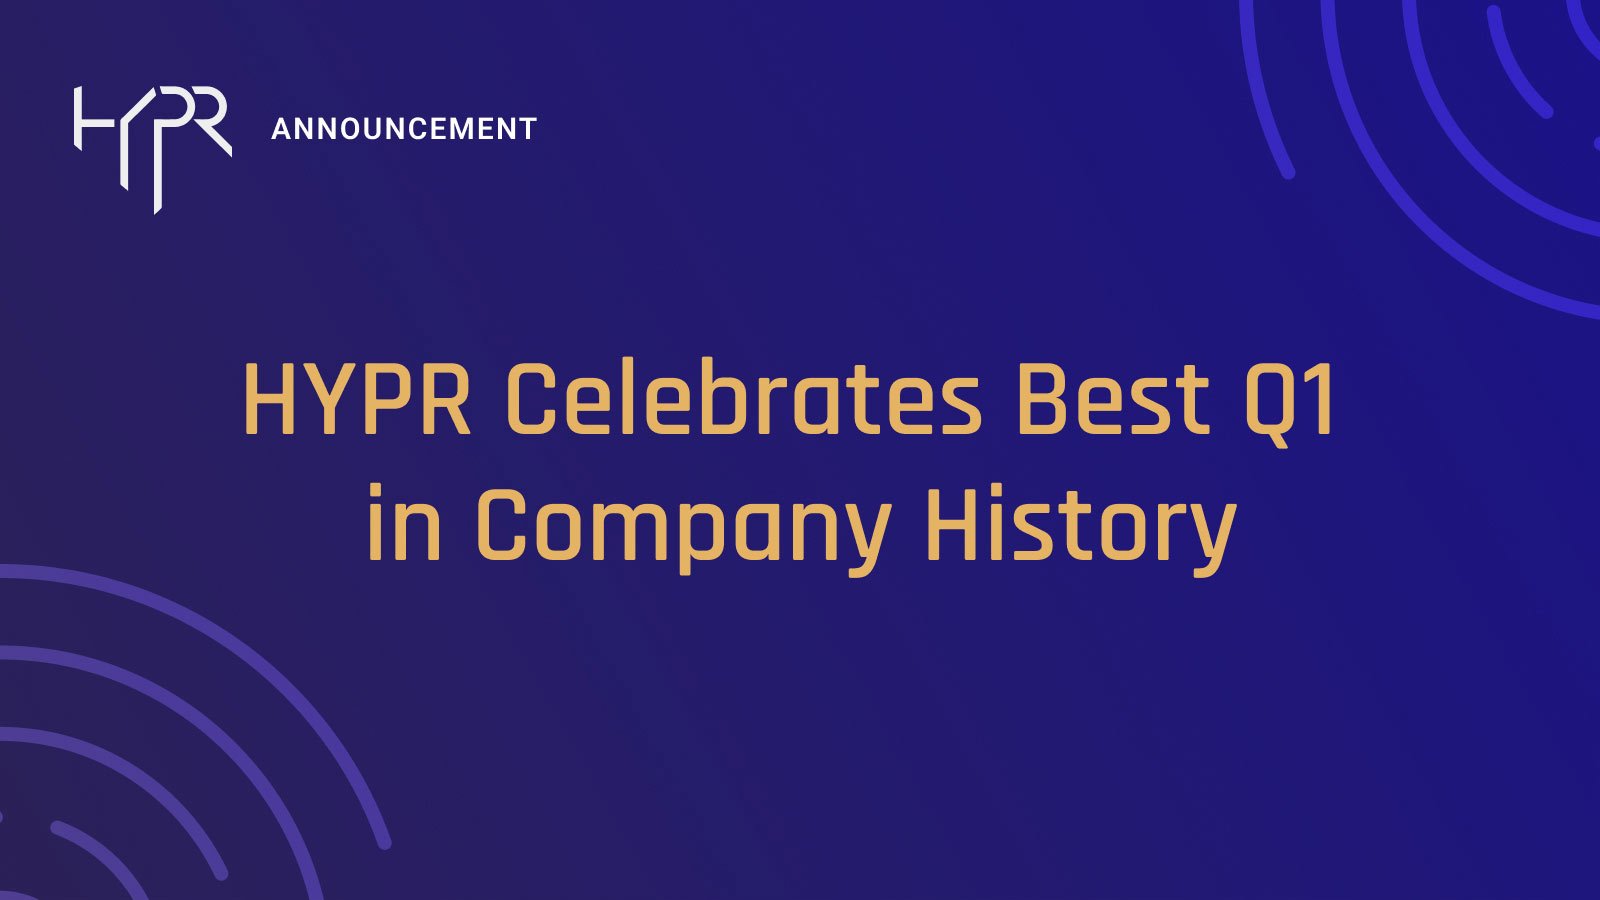 HYPR Celebrates Best Q1 in Company History and Triples The Number of Users Deployed